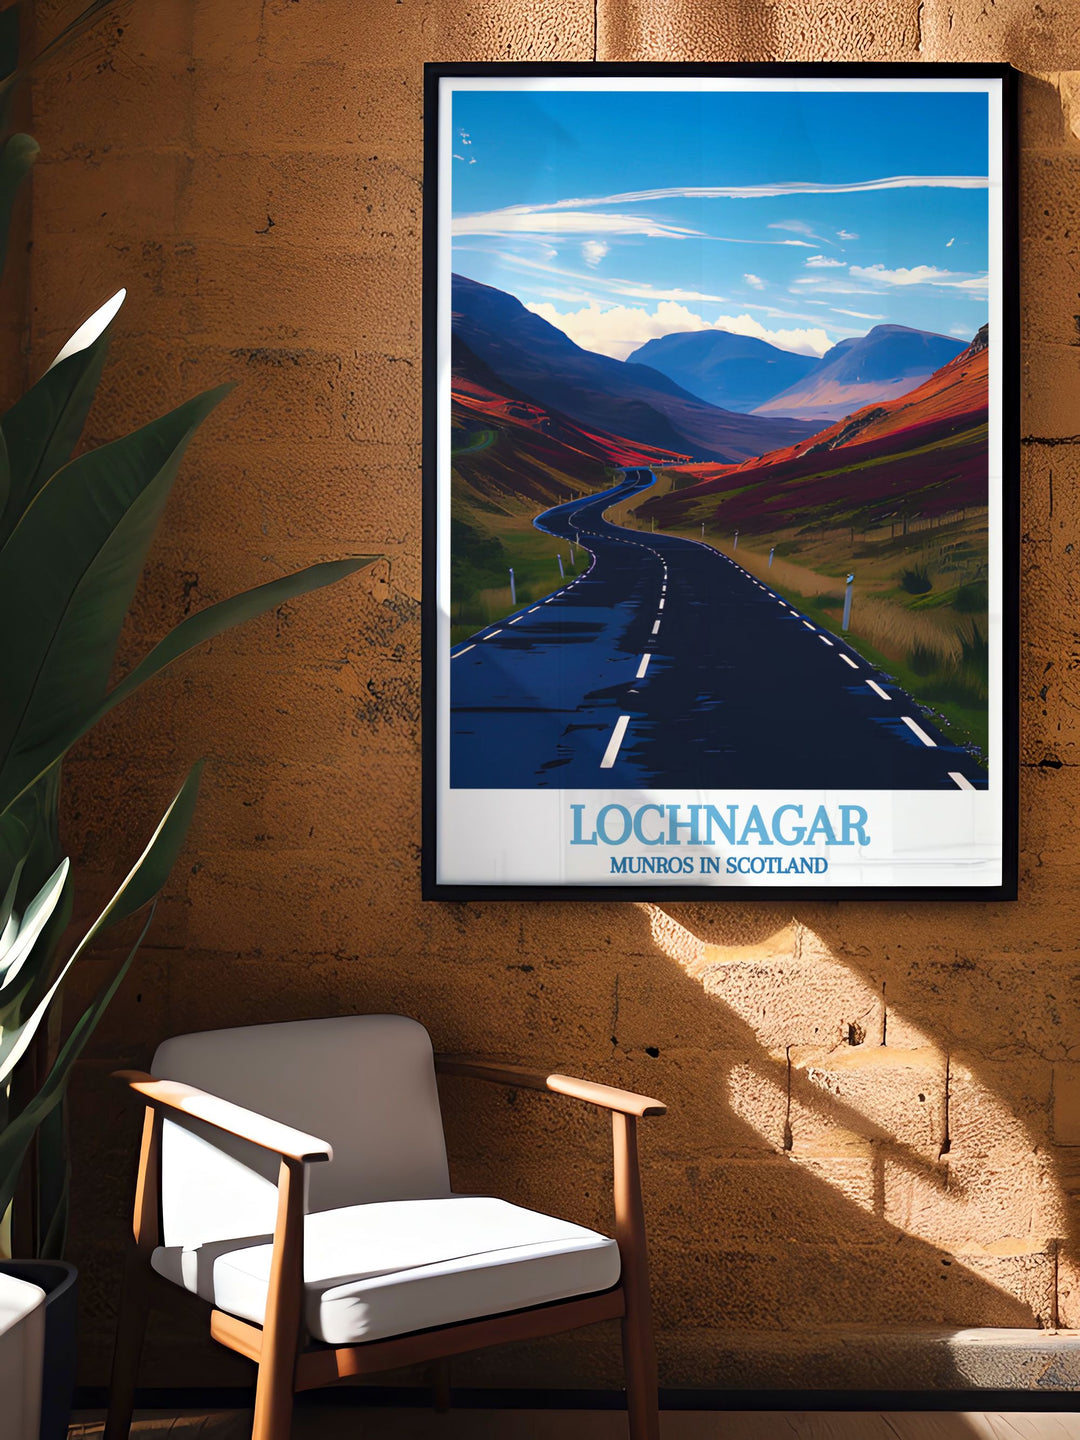 Cairnwell Pass Artwork featuring the stunning beauty of the Scottish Highlands with detailed vintage travel prints of Lochnagar Munro and Beinn Chìochan Munro bringing the majesty of nature into your home or office